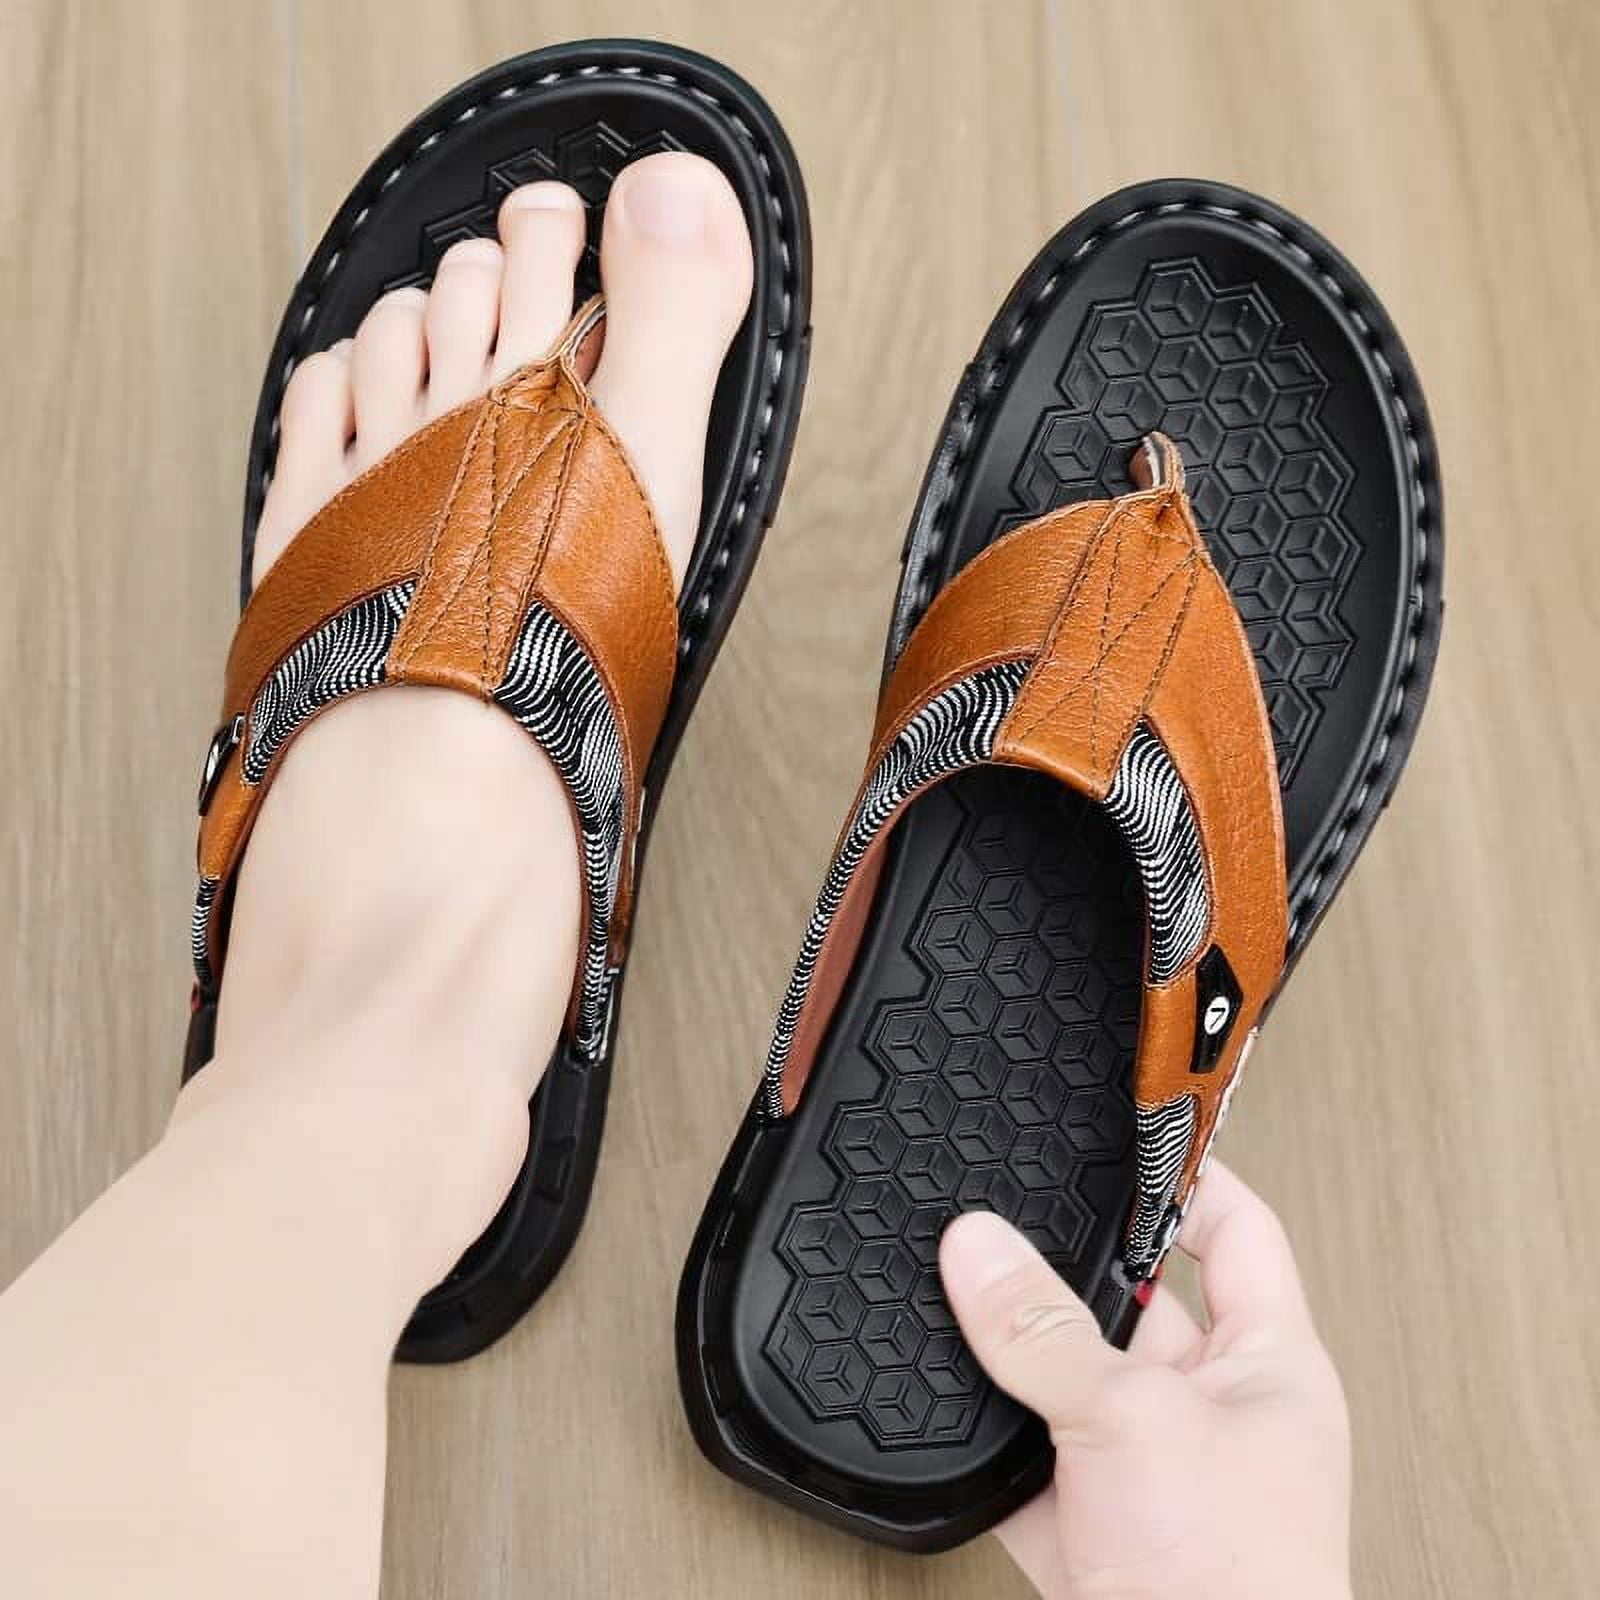 Flip Flops Men Thong Sandals Casual Leather Slippers/Summer Arch Support  Beach Shoes/Walking Surfing Boating Swimming Pool,Brown-42EU